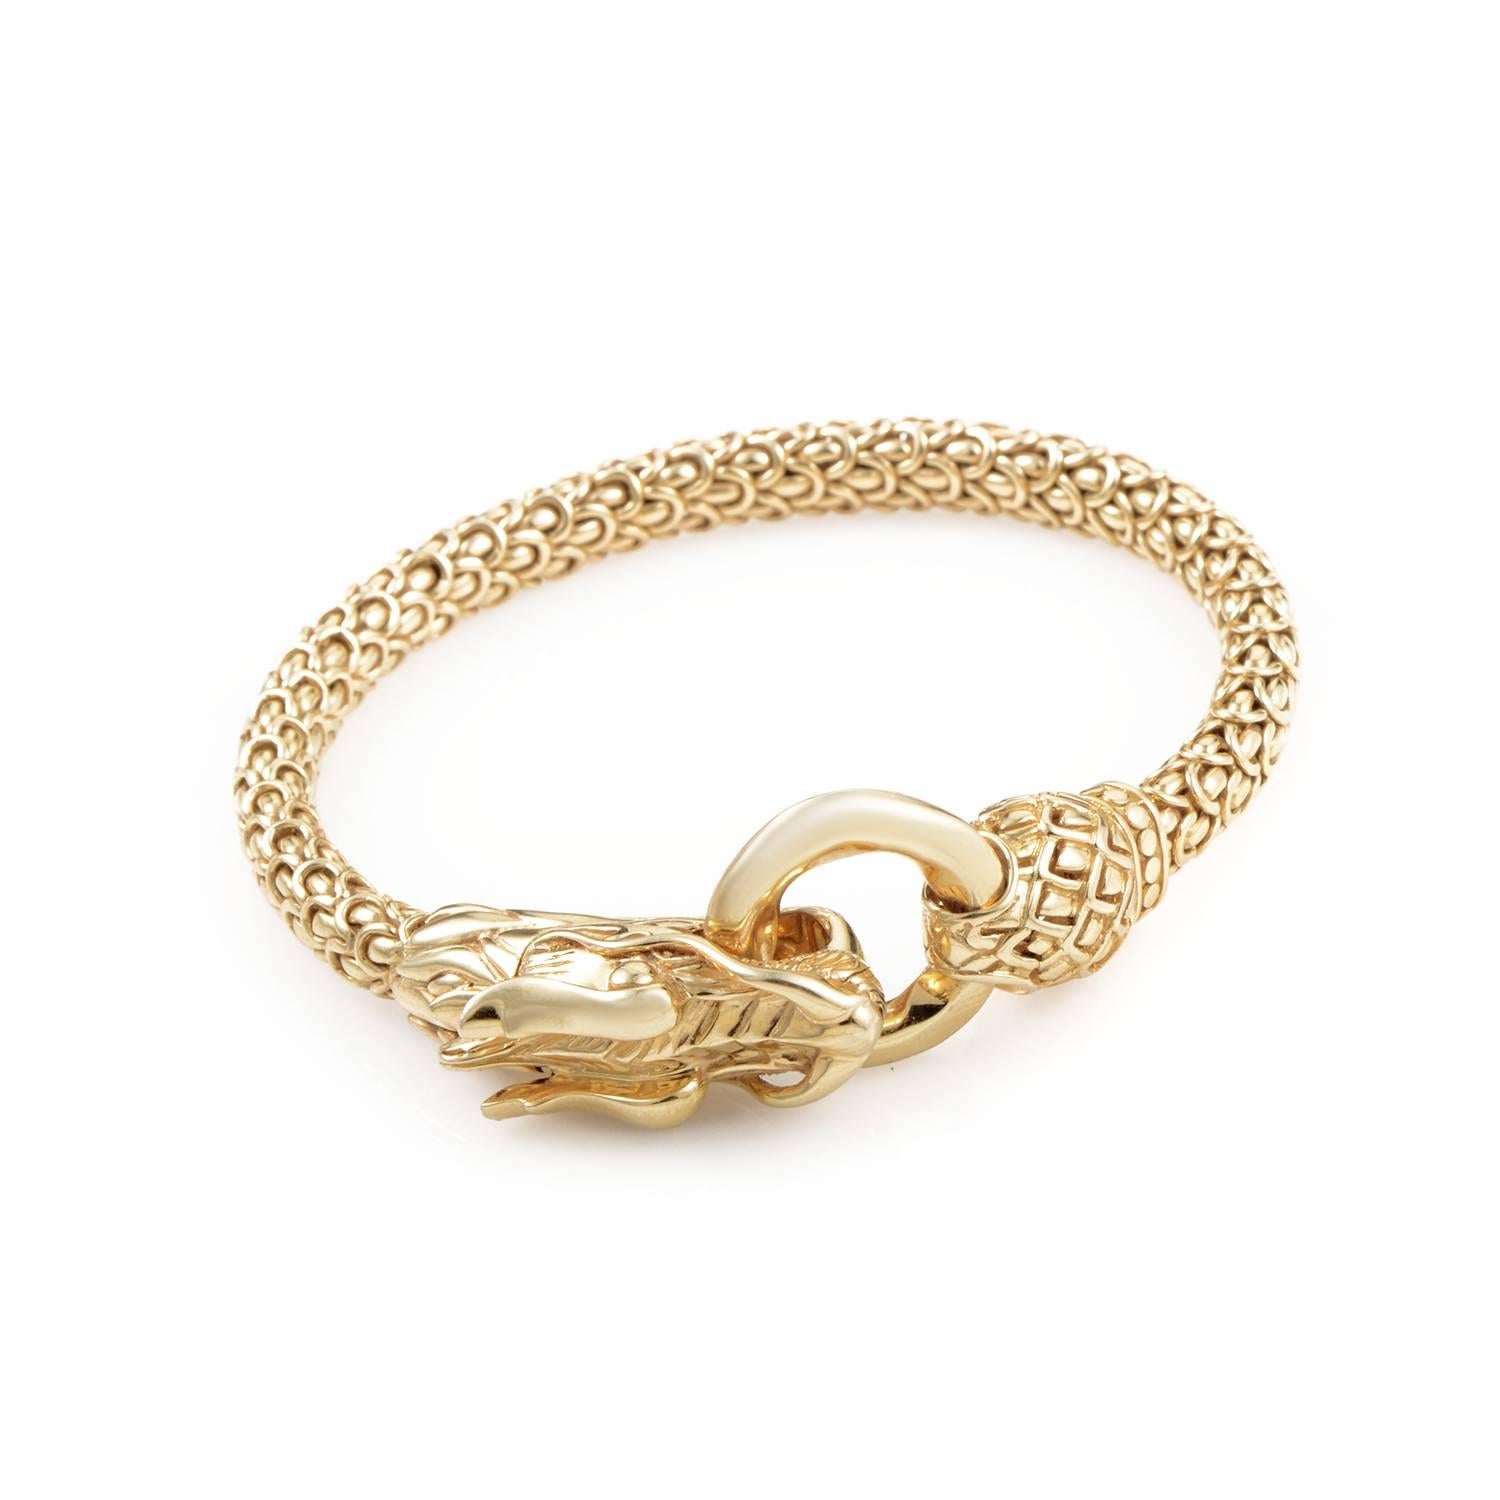 An item of extraordinary beauty and intriguing design, this astonishing bracelet from John Hardy boasts the daring motif of a dragon with its head securing the clasp and its supple body comprised of fascinatingly created 18K yellow gold